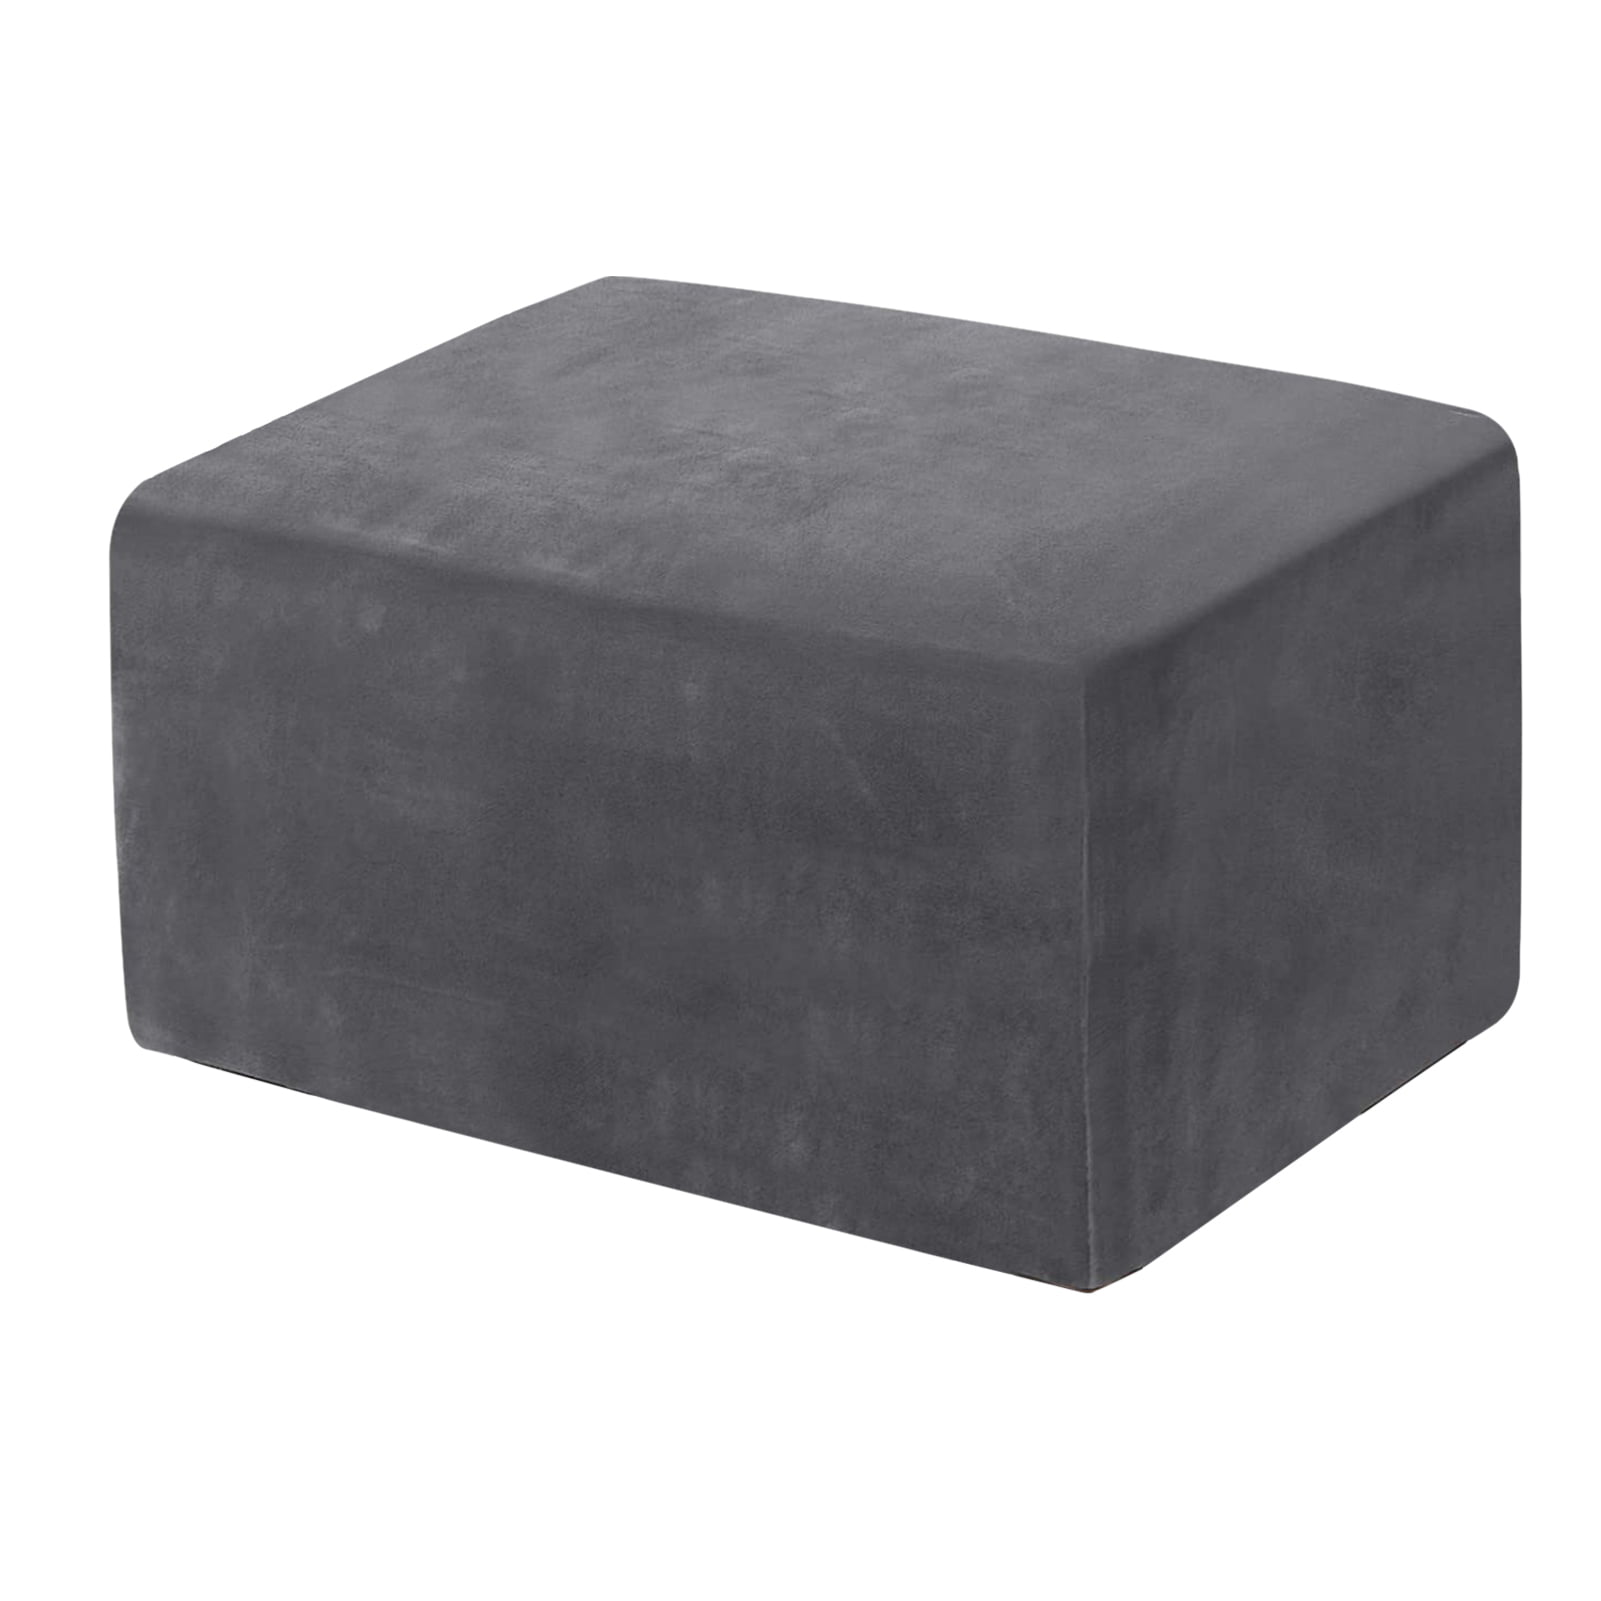 Details about   Velvet Square Footstool Cover Stretch Stool Ottoman Sofa Slipcover Protector 